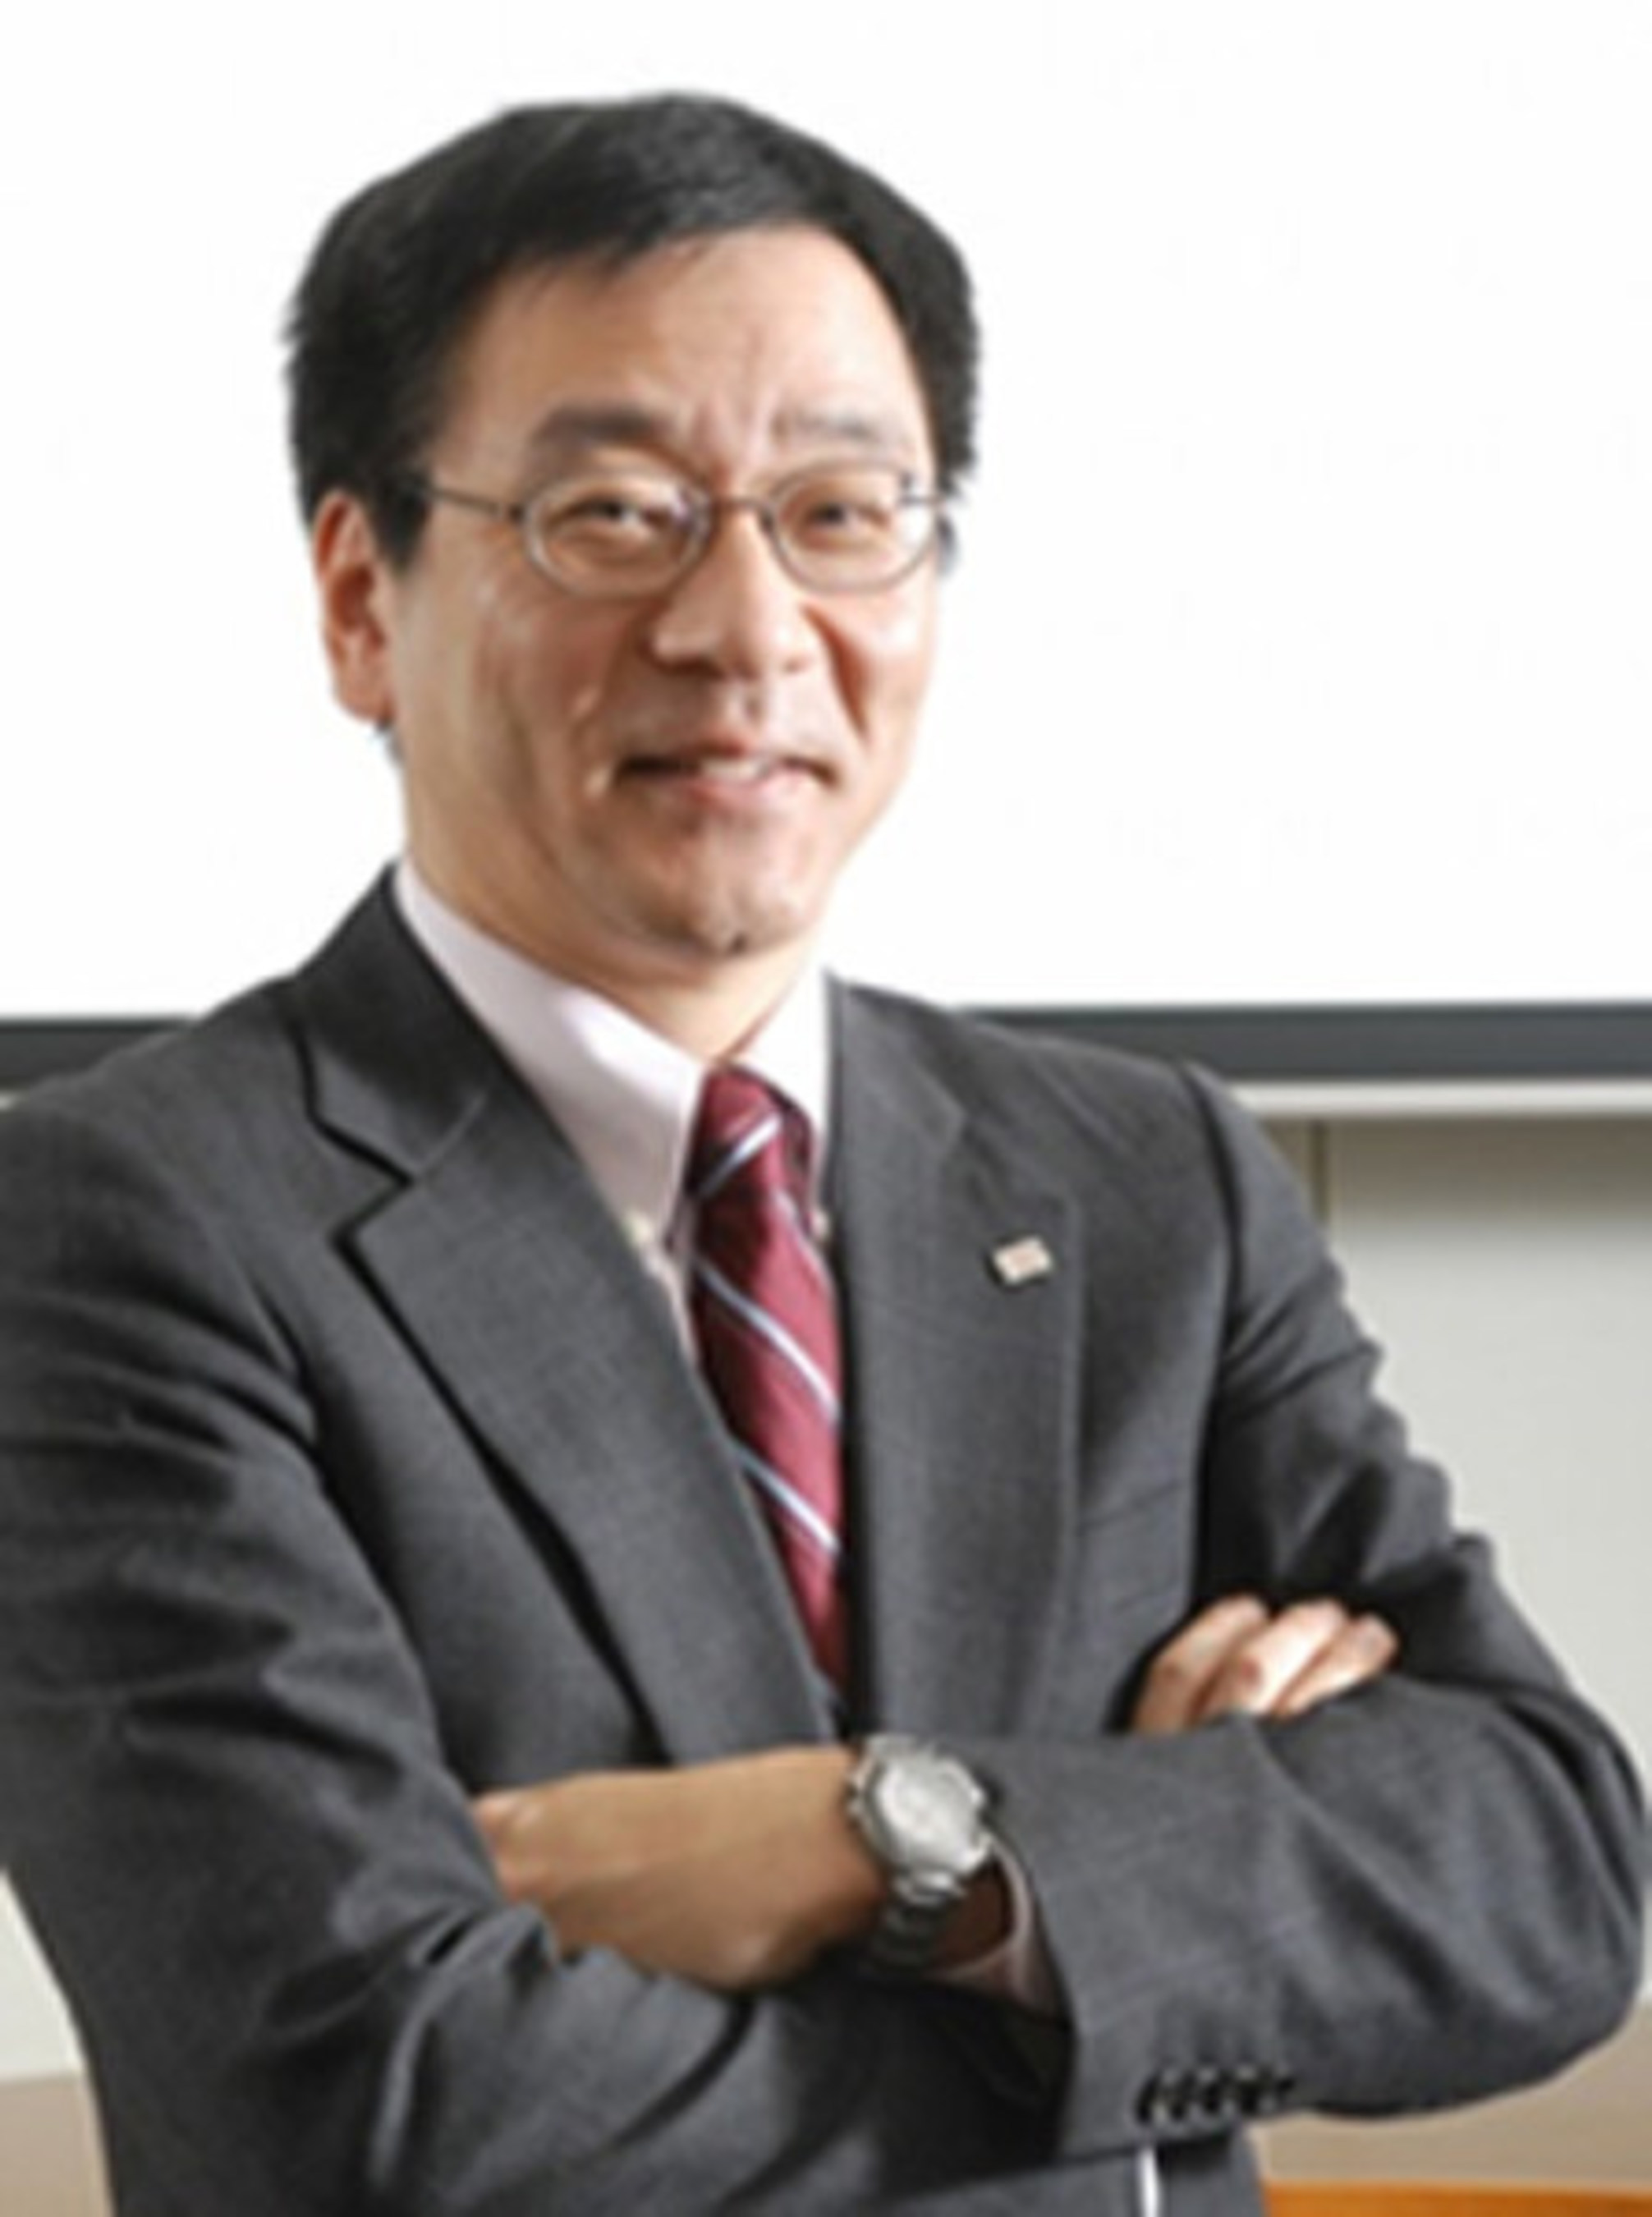 Toshiba's Shigeo (Jeff) Ohshima (pictured above) and Yoichiro Tanaka will jointly present a keynote session at FMS titled: "New 3D Flash Technologies Offer Both Low Cost and Low Power Solutions."